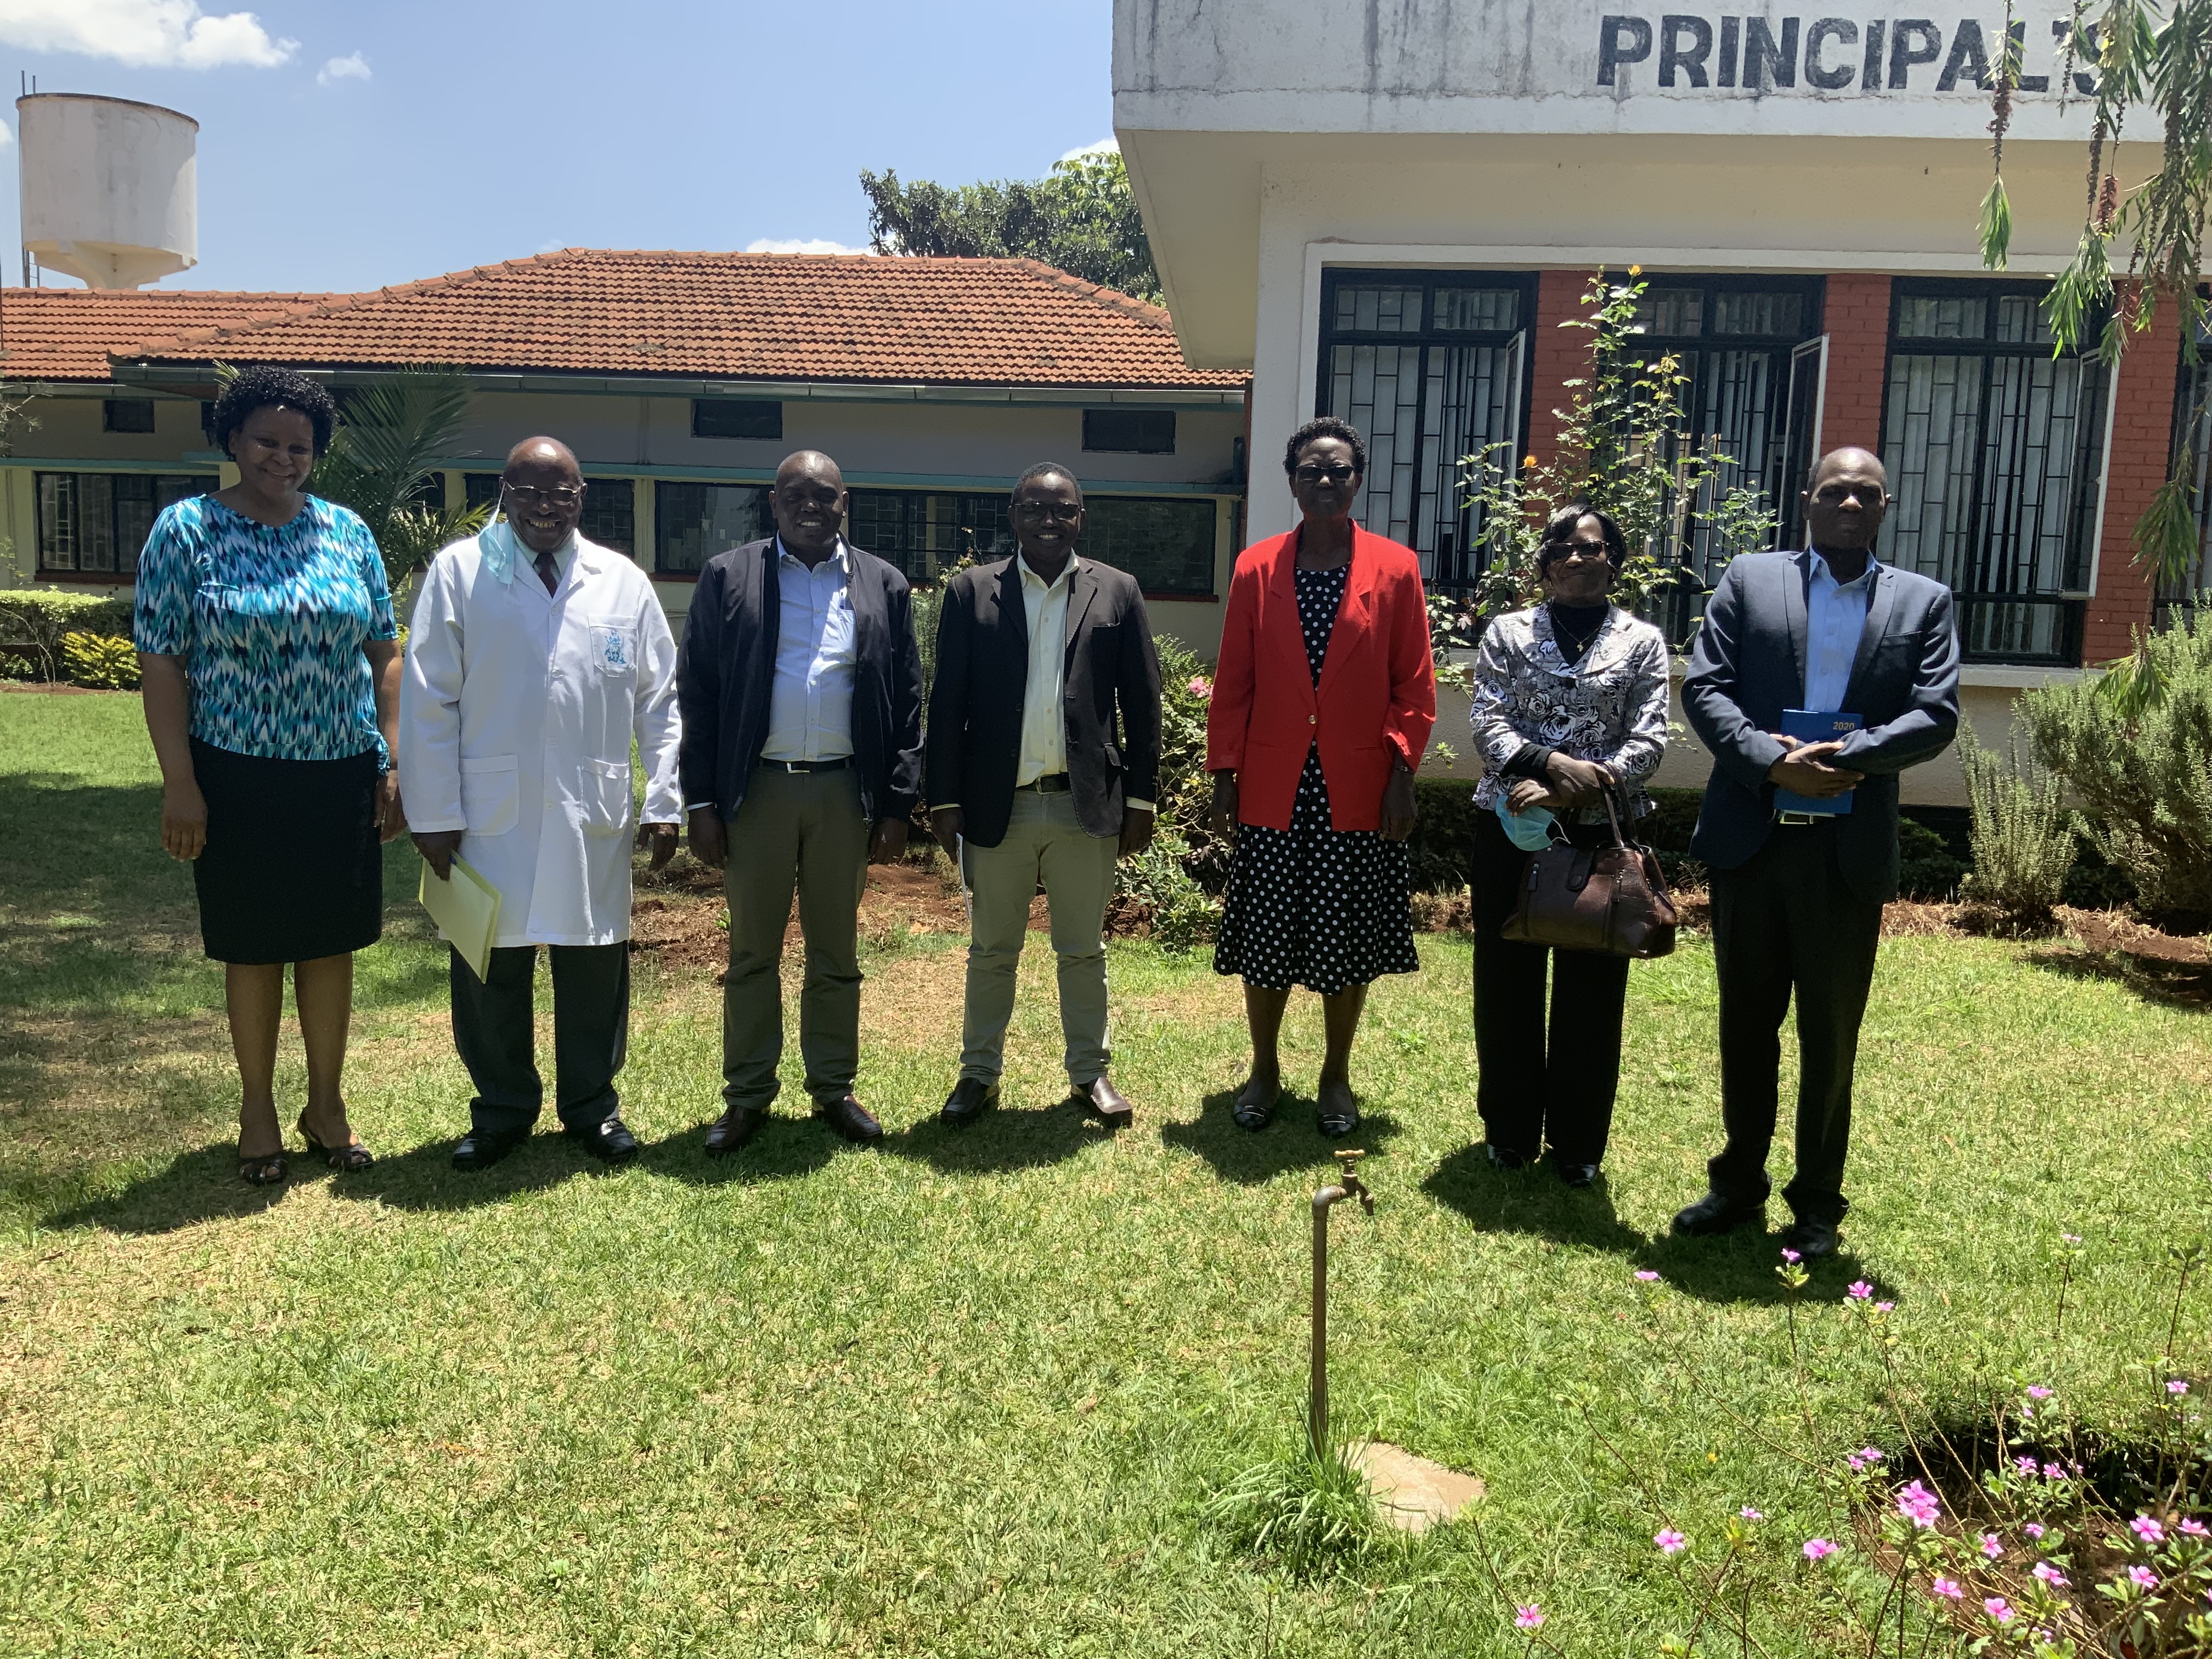 A meeting held between Agricultural Development Corporation and University of Nairobi to discuss potential collaboration in commercialization of agricultural technology developed at University of Nairobi. The meeting was held at the Faculty of Agriculture, Upper Kabete Campus, University of Nairobi on 28th October 2021. 